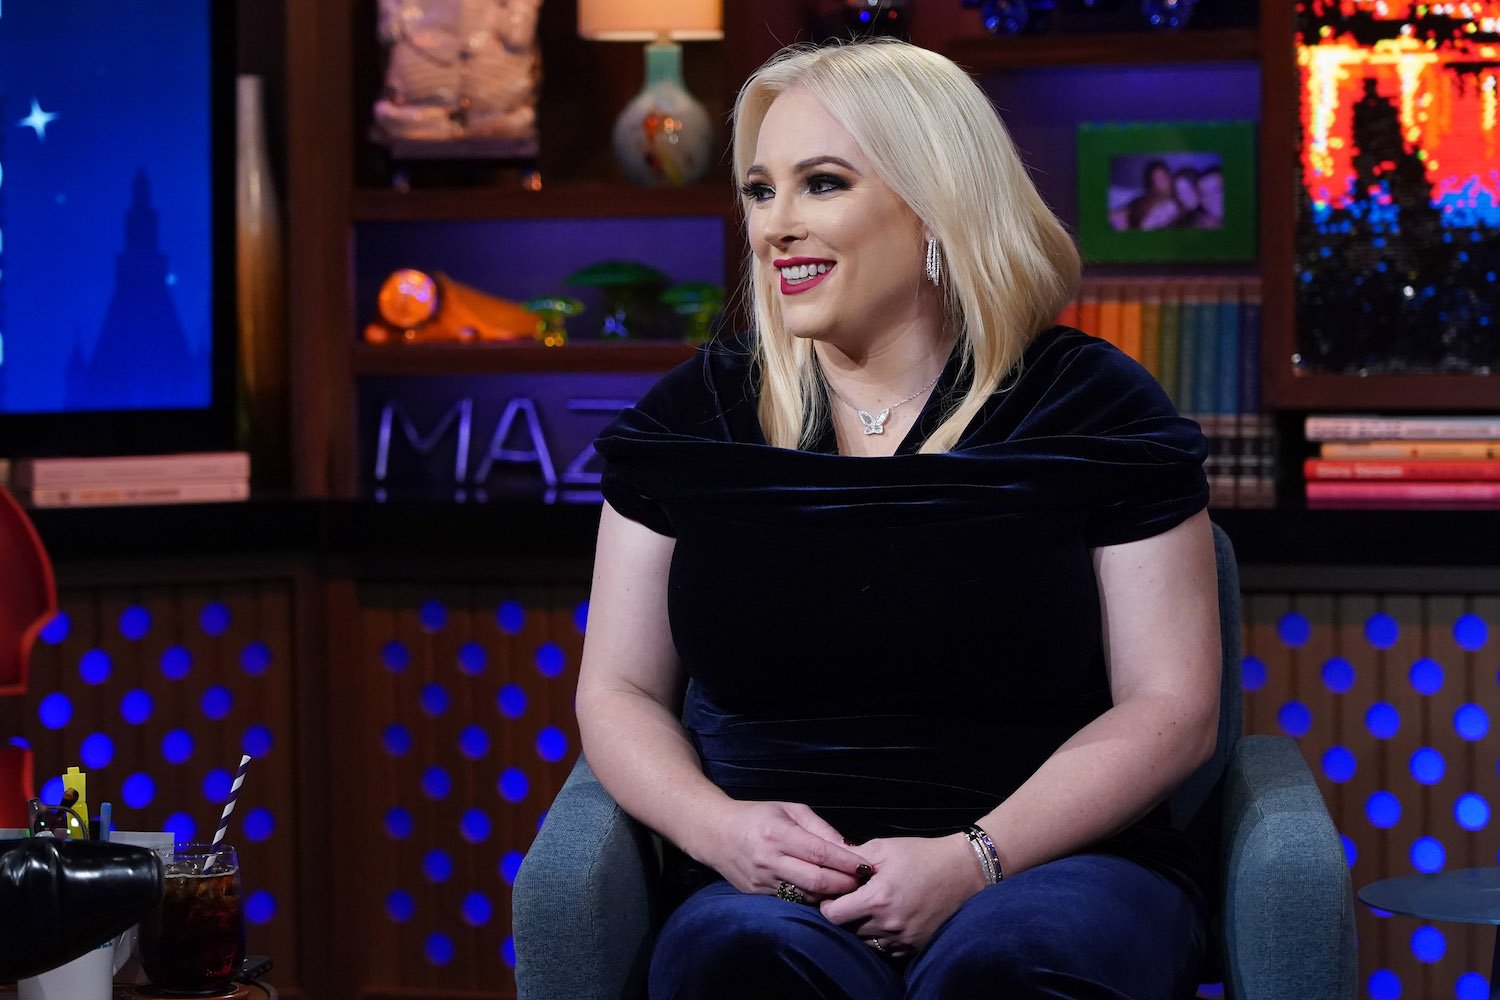 Meghan McCain wears a black top during an interview with Andy Cohen on 'Watch What Happens Live'